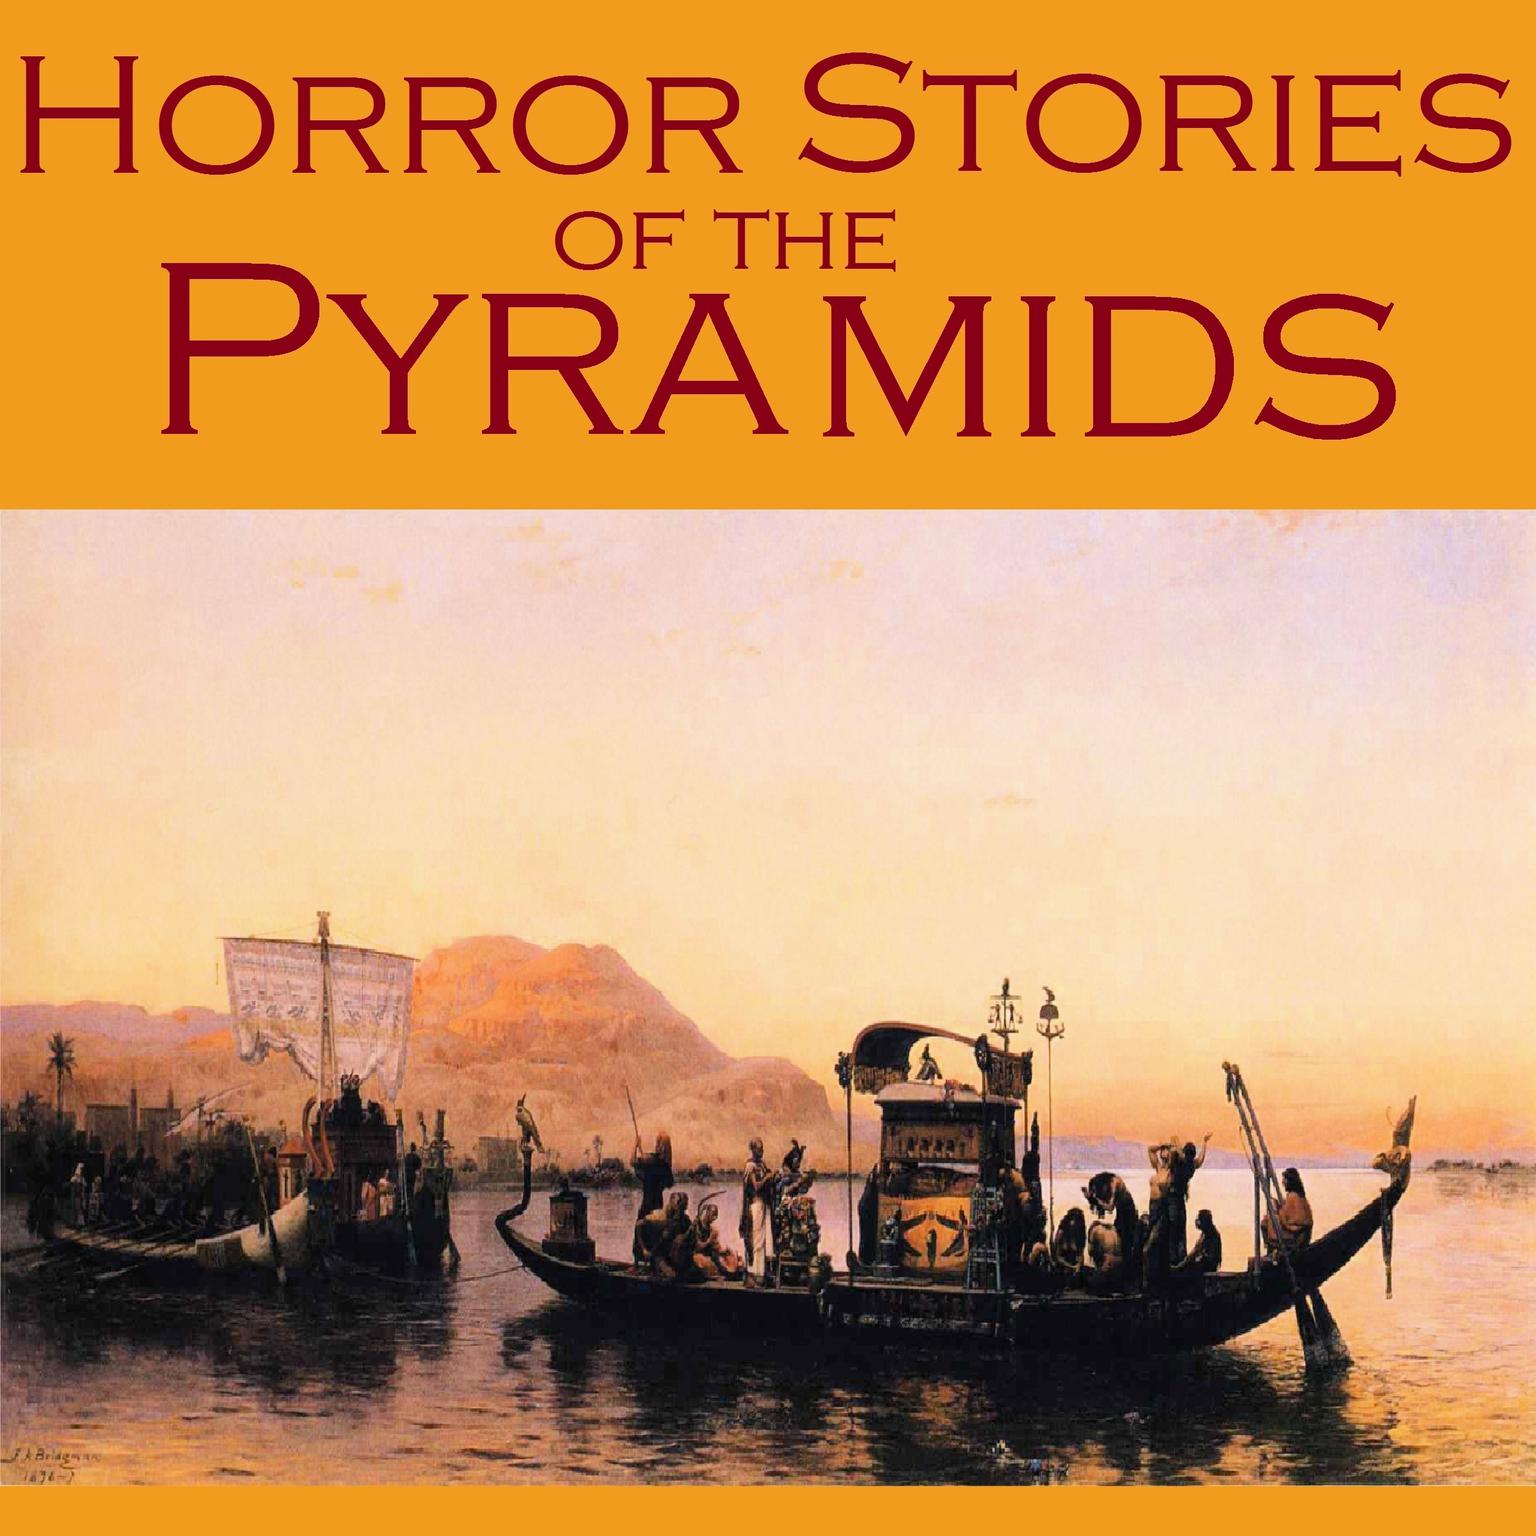 Horror Stories of the Pyramids: Gothic Tales of Ancient Egyptian Curses, Undead Mummies, and Vengeful Pharoahs Audiobook, by various authors